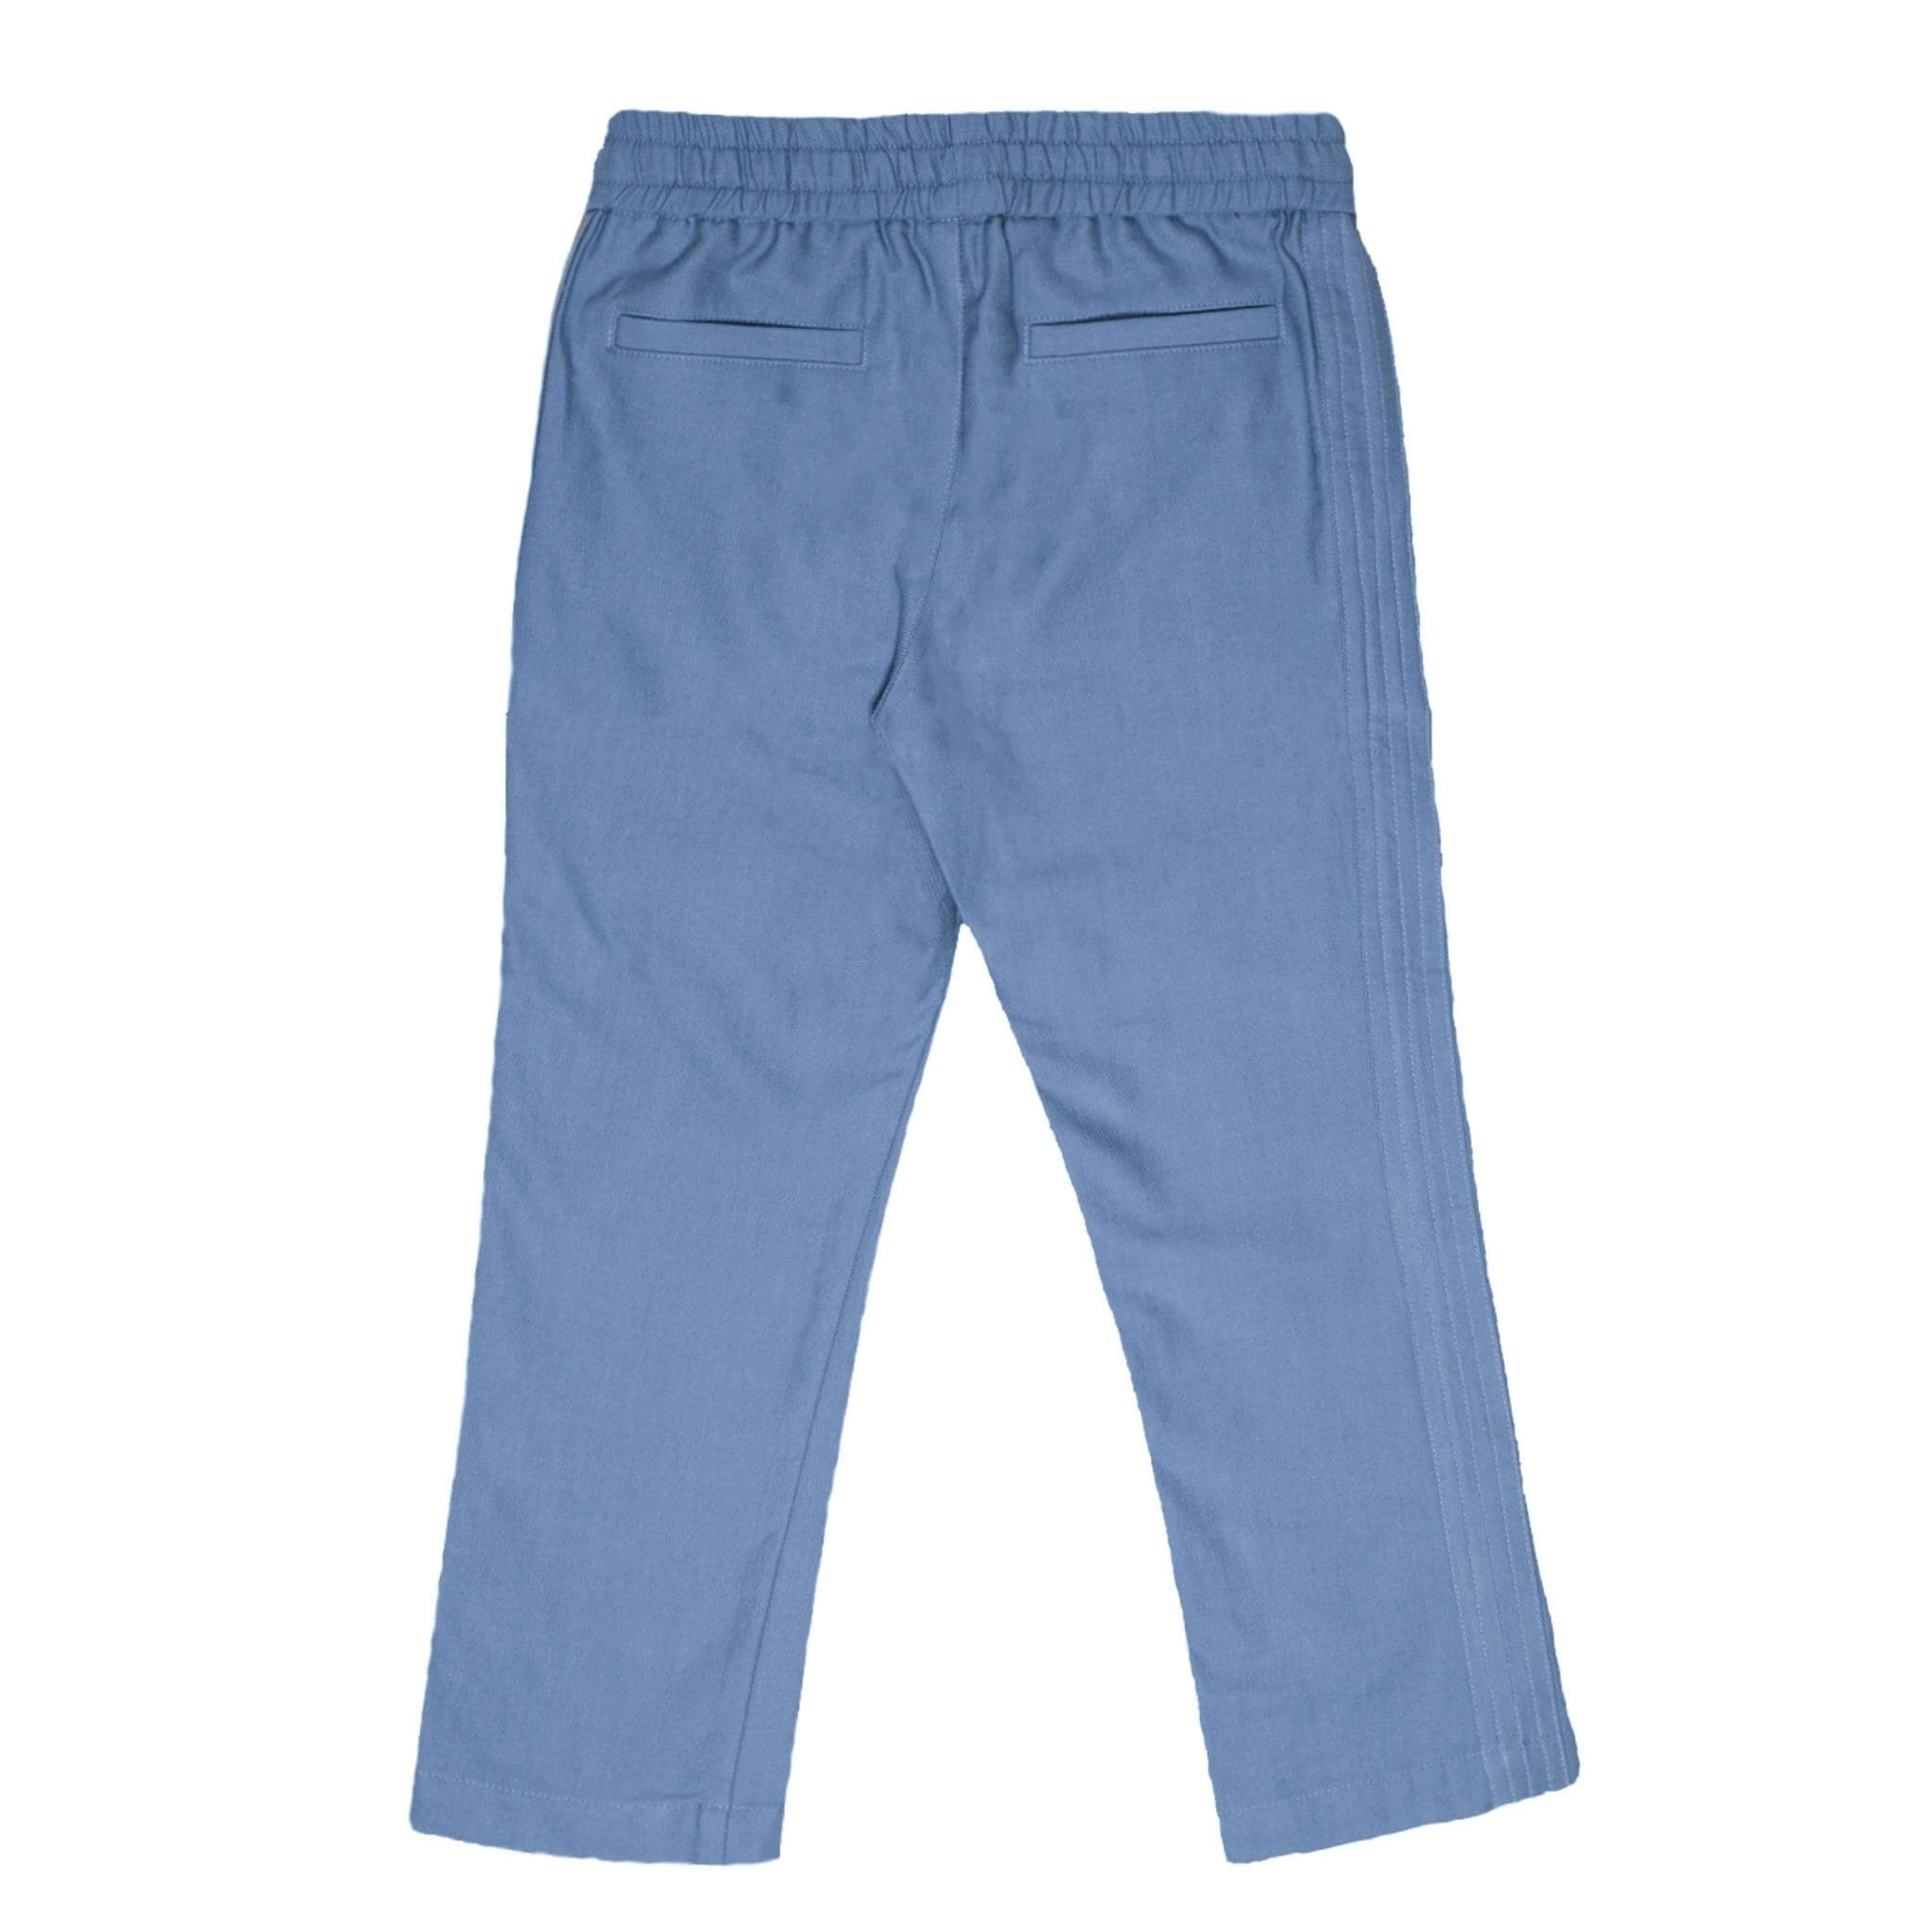 The perfect jean from our Kids Essentials collection. Soft Denim Pants in light blue (view from back), made of 100% organic Japanese cotton for sustainable and high-quality fashion.